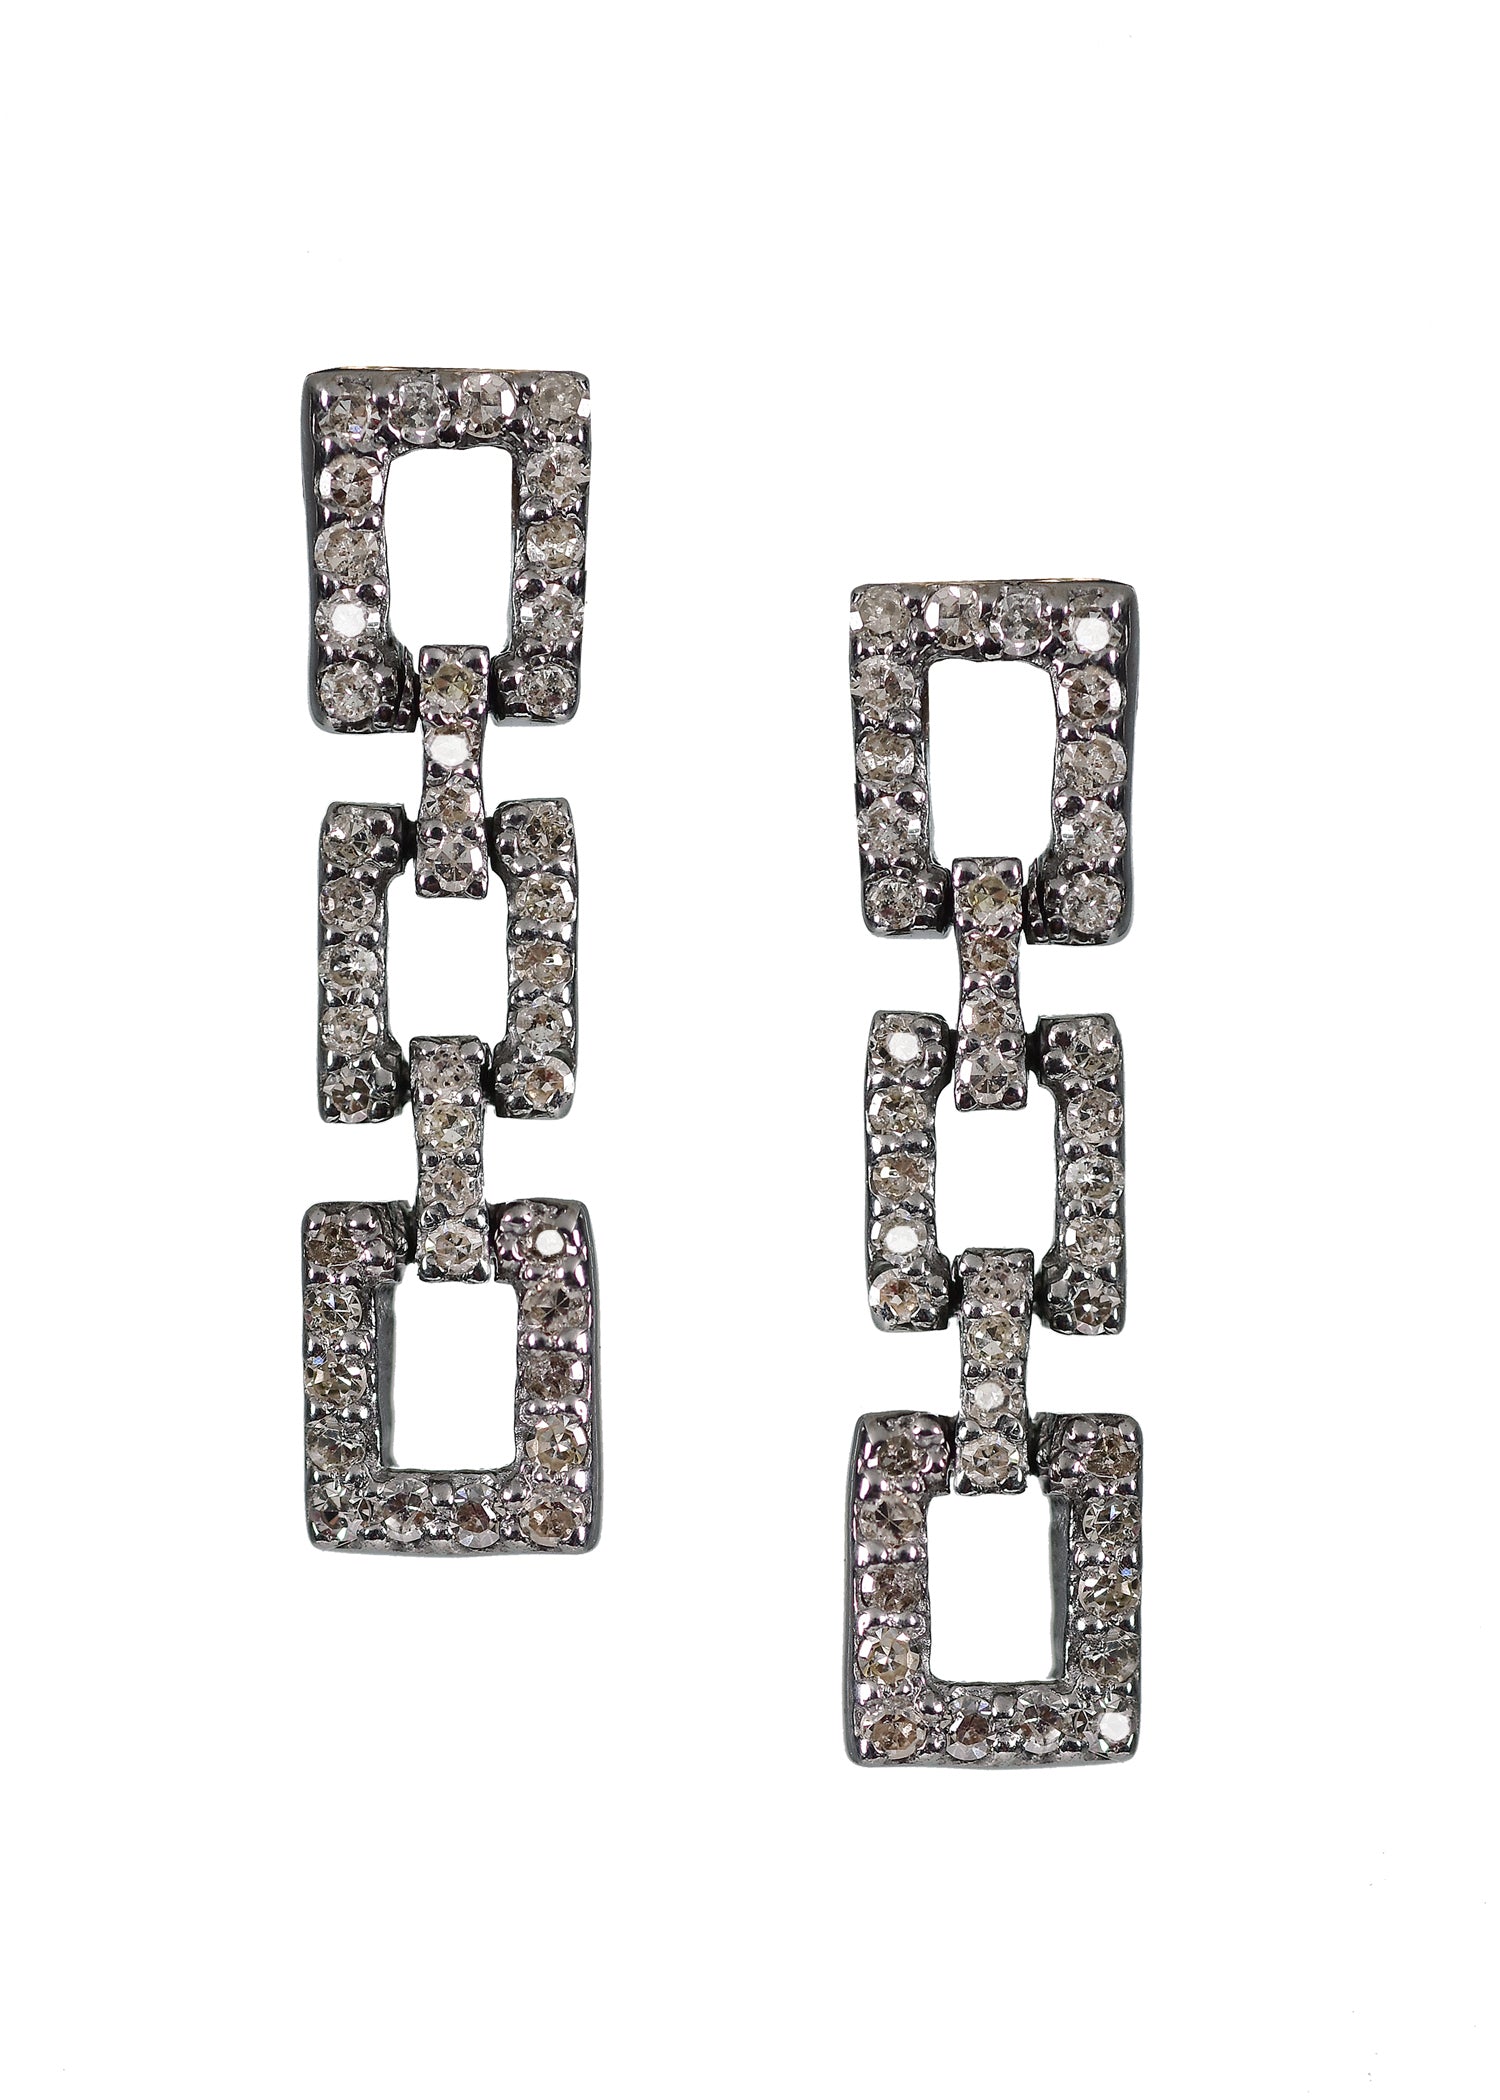 Diamond Sterling silver Special order only Earrings measure 3/4" in length and 3/16" in width Handmade in our Los Angeles studio